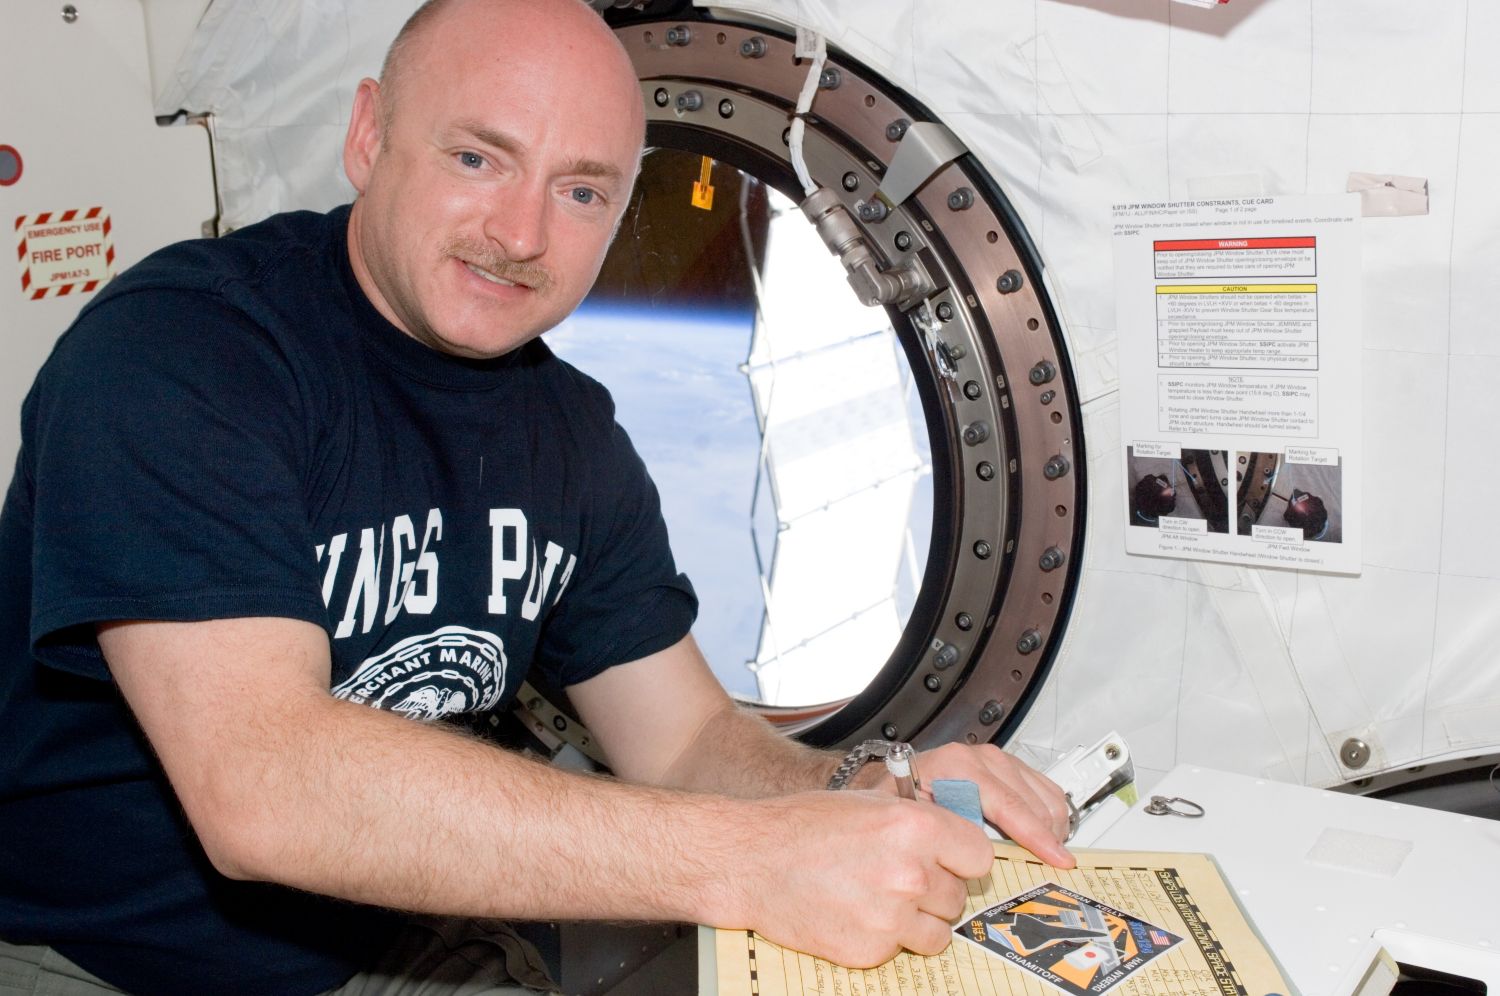 Astronaut Mark Kelly, STS-124 commander, makes an entry in the International Space Station ships log in the Japanese Experiment Module (JEM) Pressurized Module.